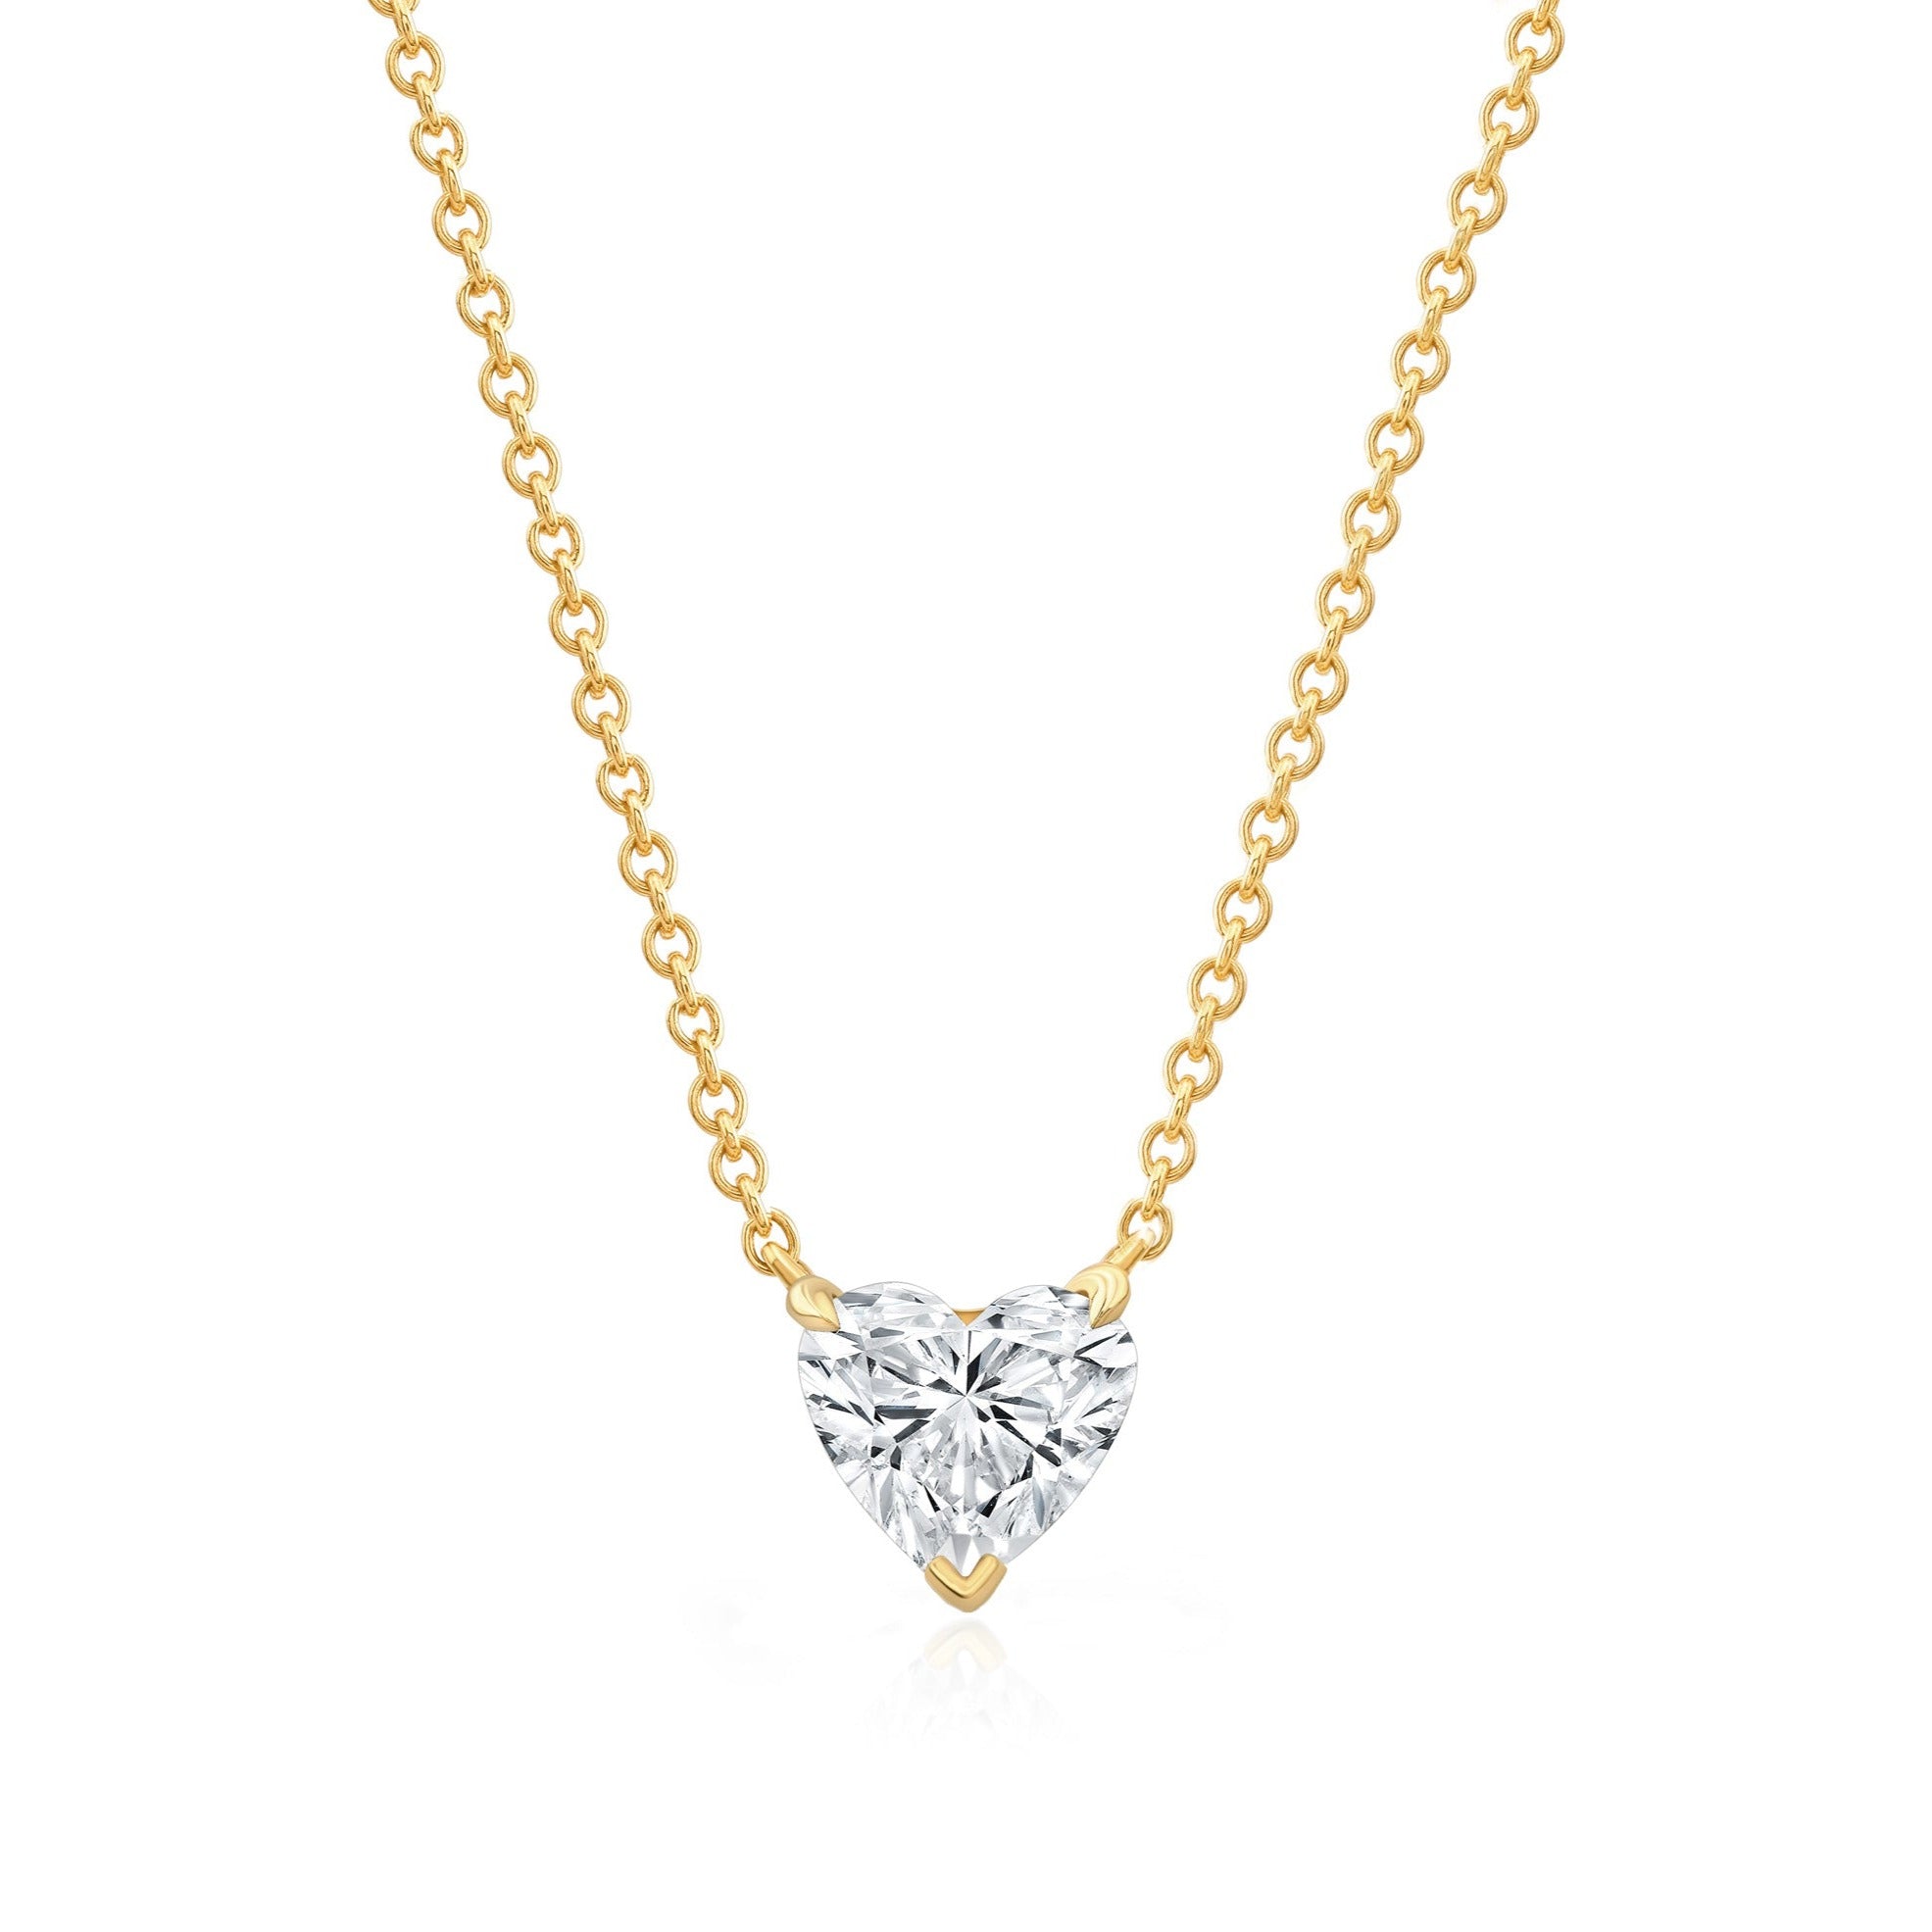 Diamond Heart Solitaire Necklace in 14k yellow gold with 1 carat heart shaped diamond